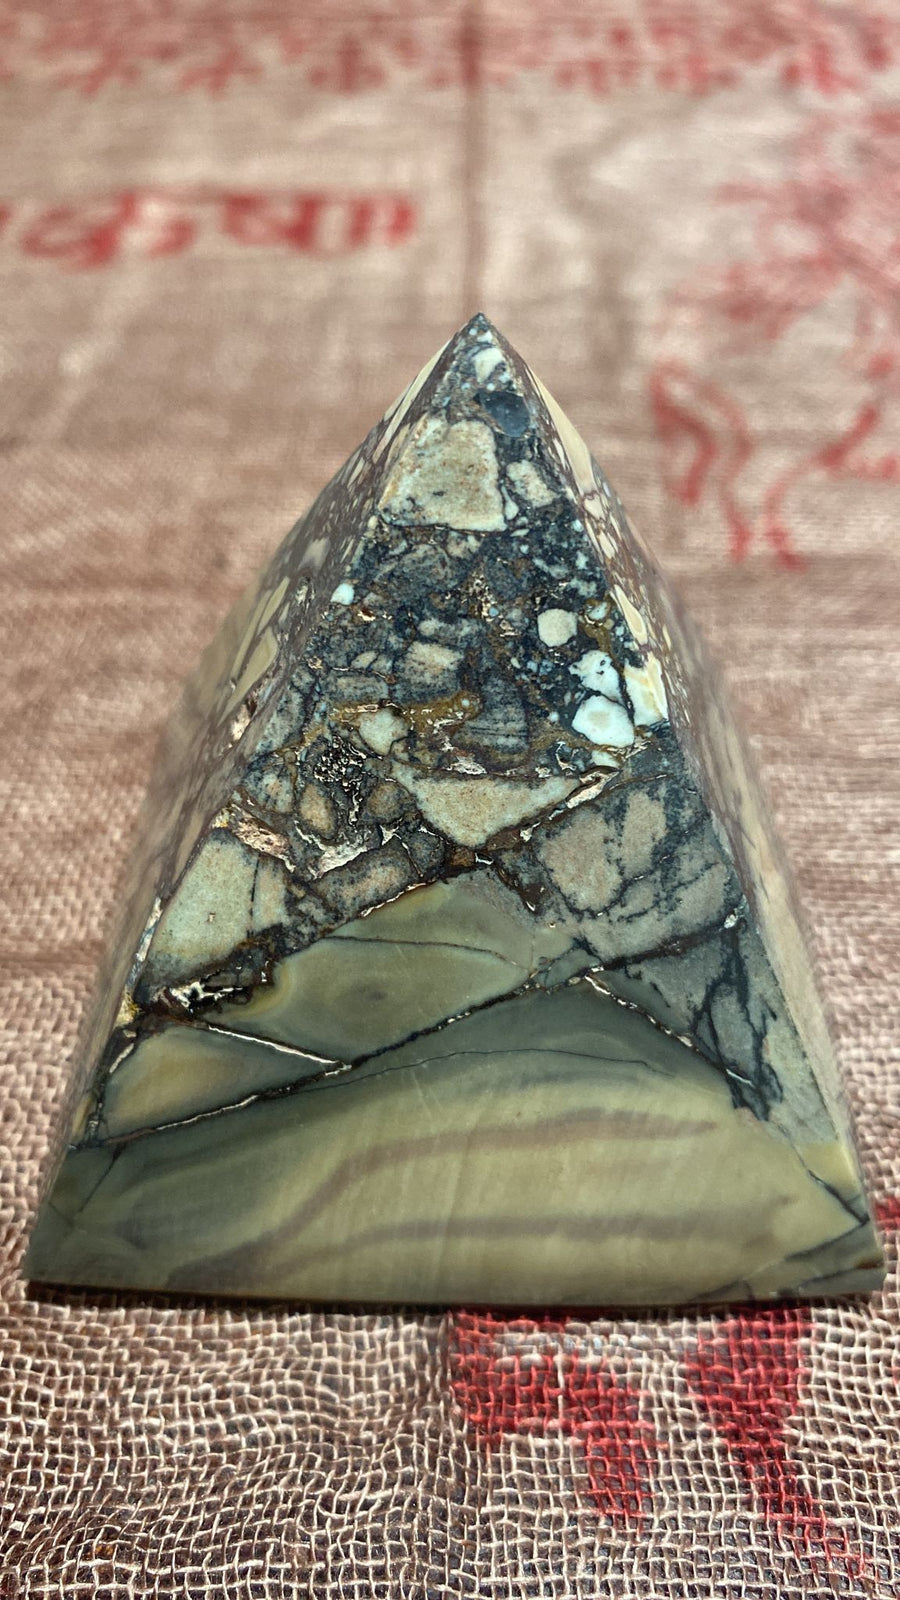 Crystal Pyramids for Sale in Eugene, OR